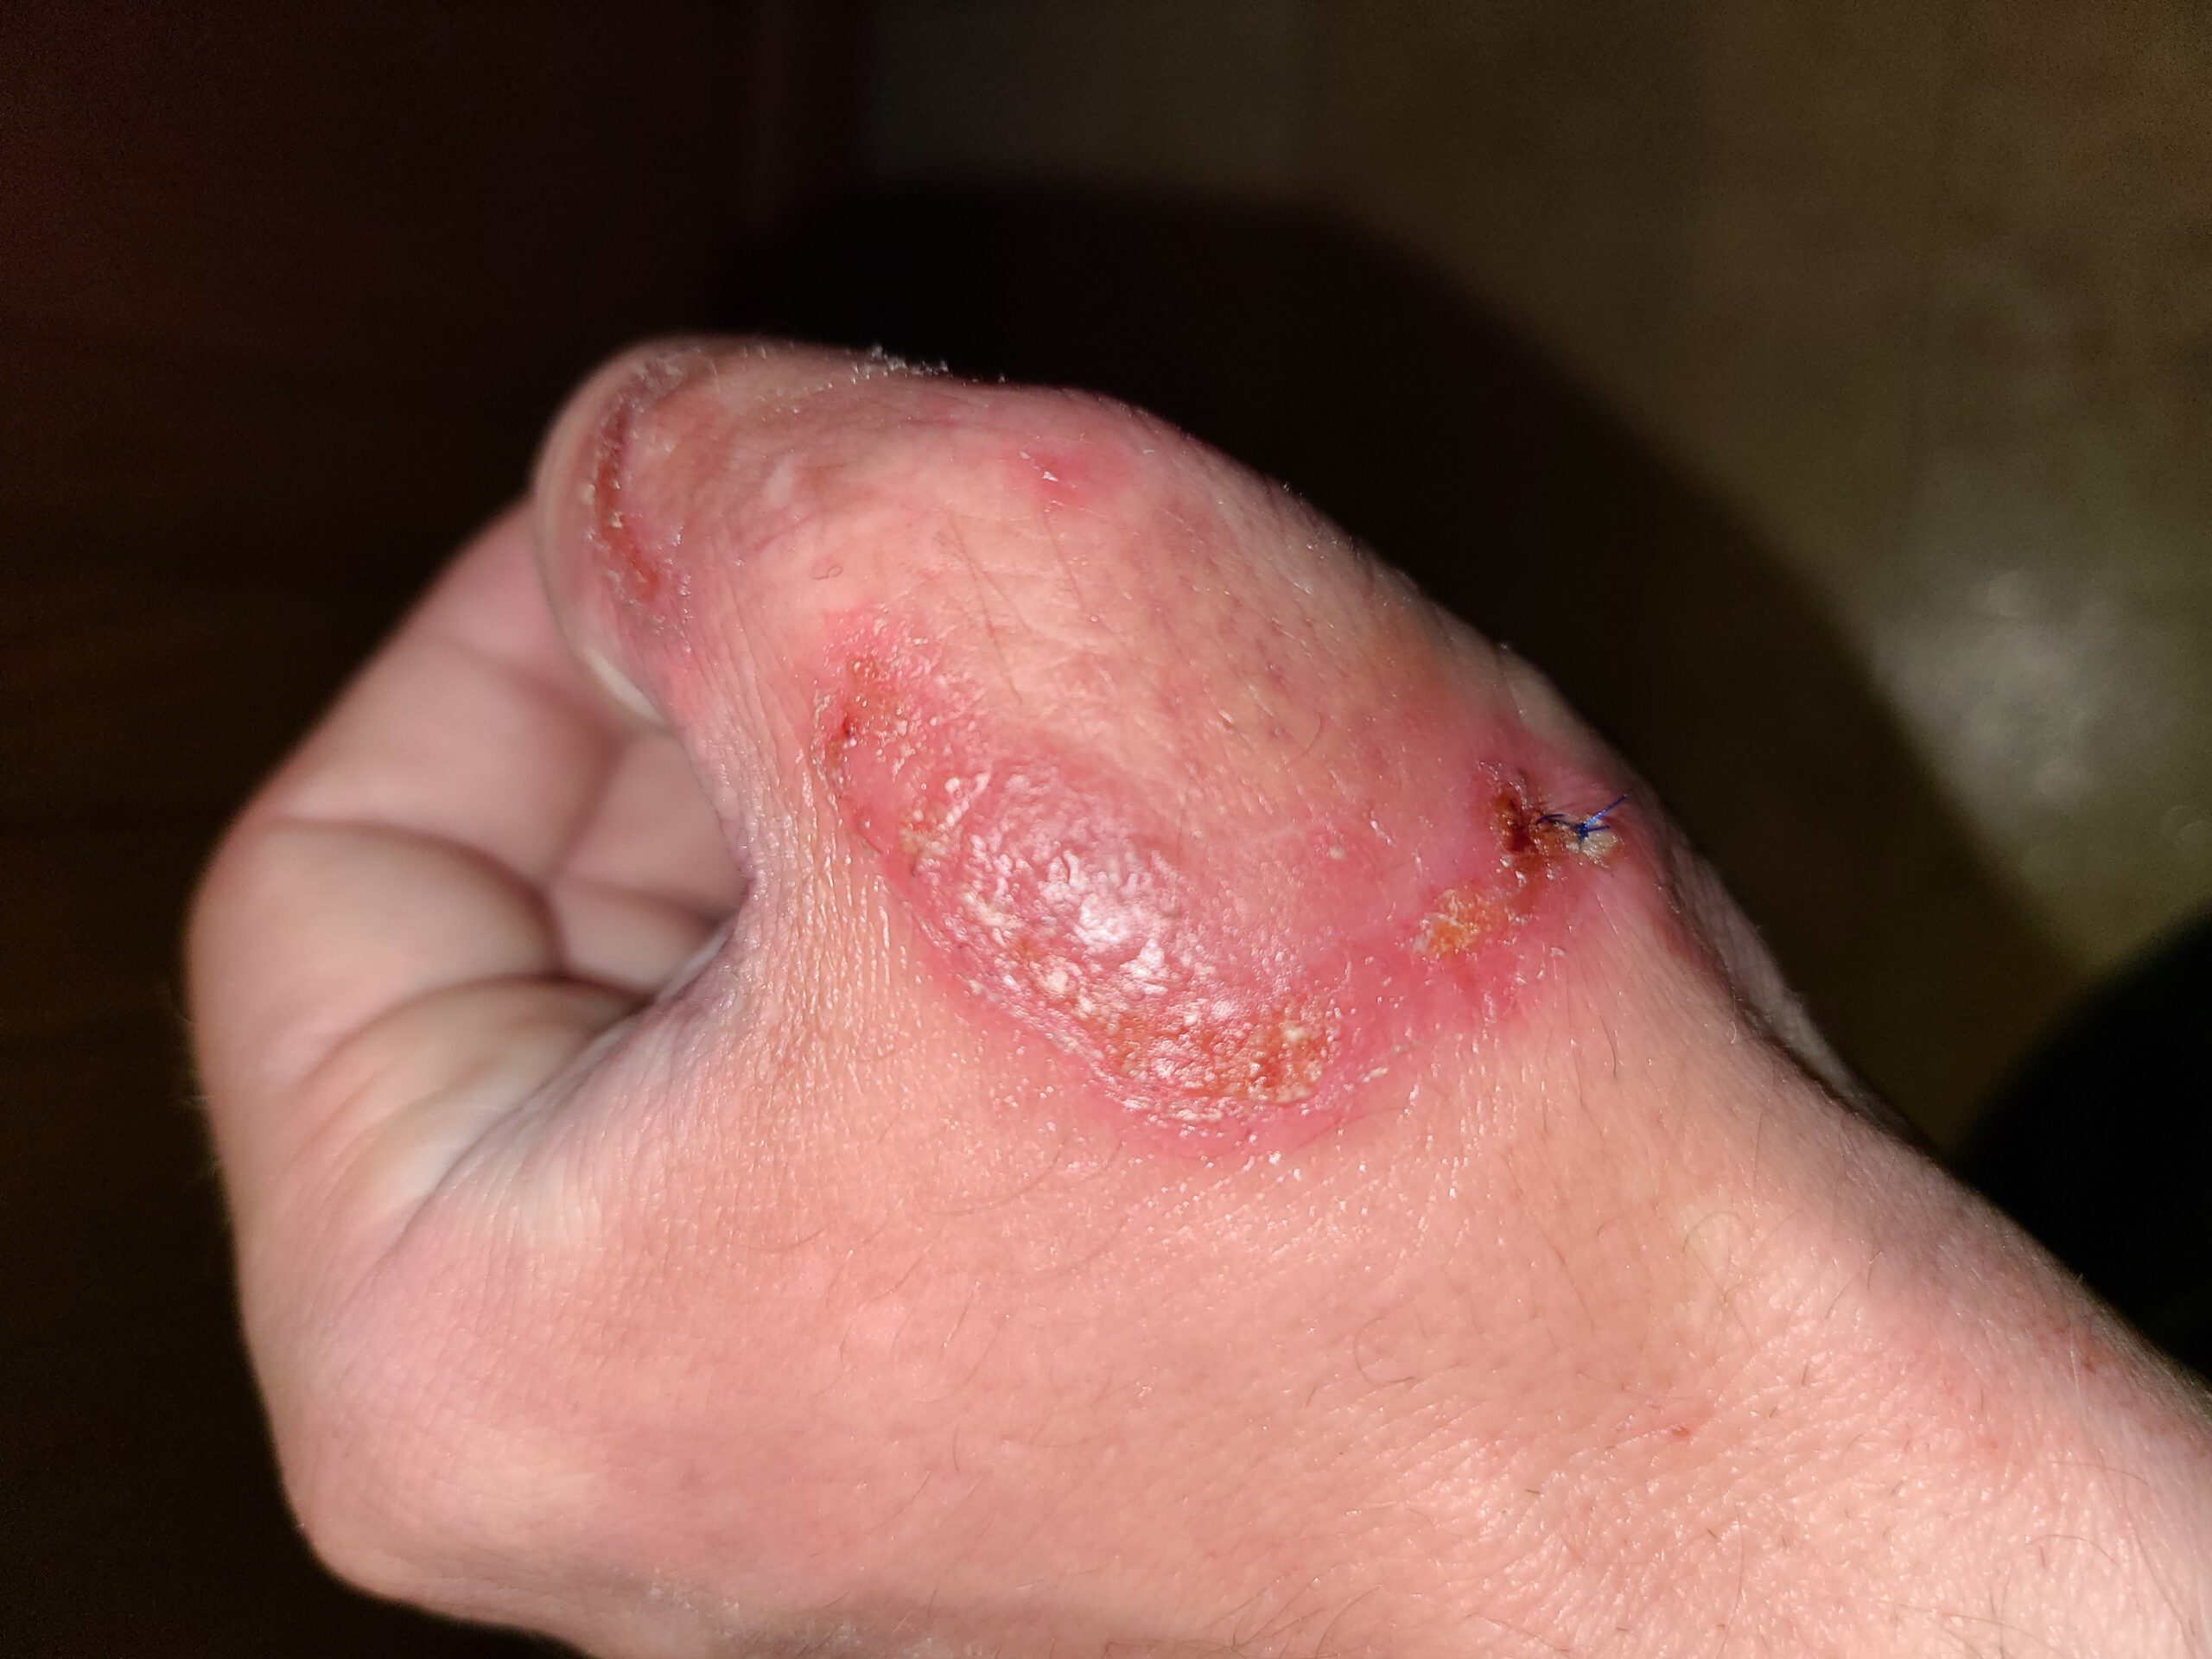 Fungal infection a hunter got from a coyote.